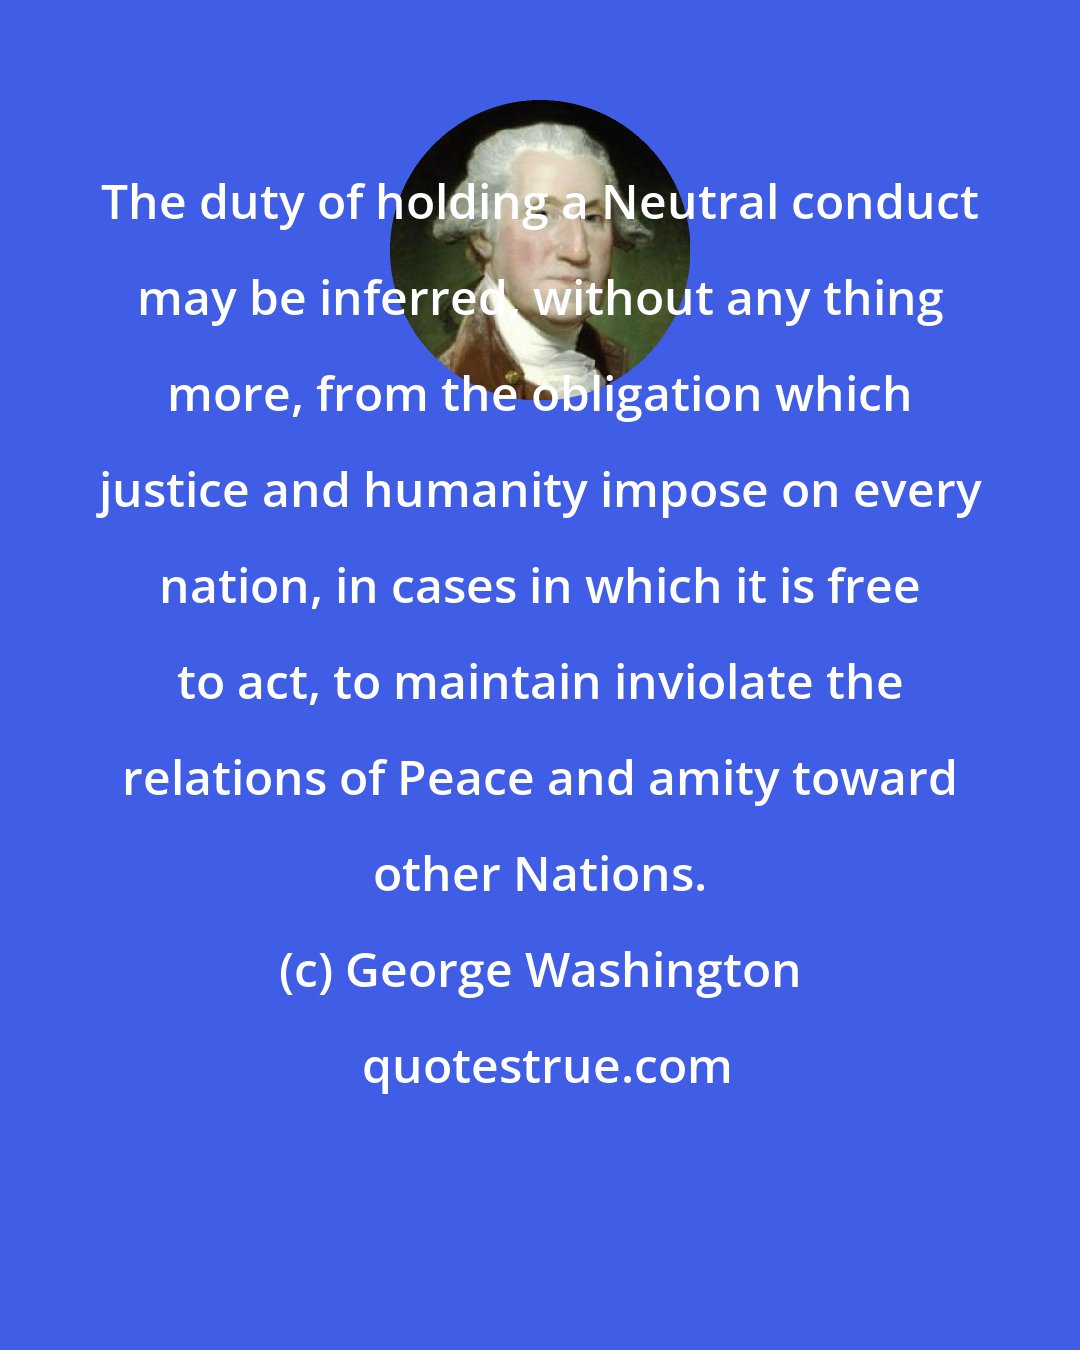 George Washington: The duty of holding a Neutral conduct may be inferred, without any thing more, from the obligation which justice and humanity impose on every nation, in cases in which it is free to act, to maintain inviolate the relations of Peace and amity toward other Nations.